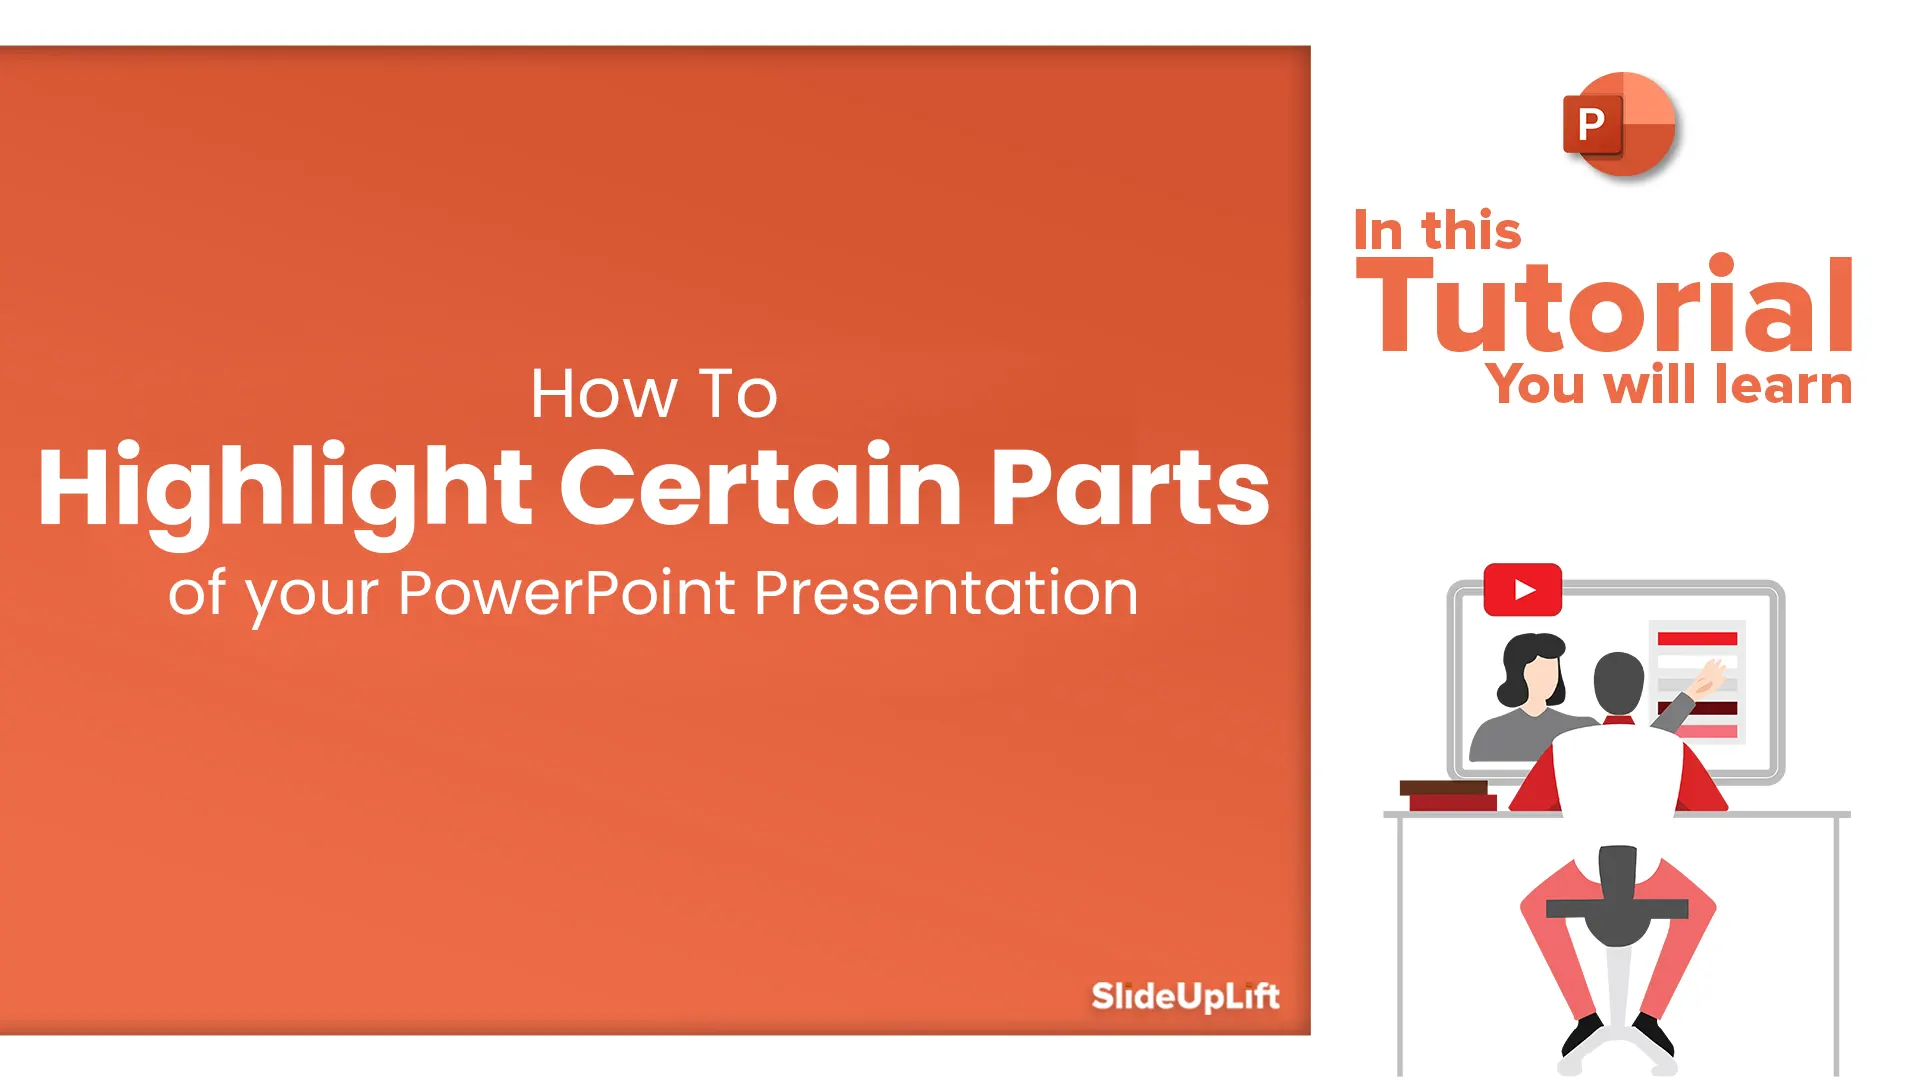 How To Highlight Certain Parts Of Your PowerPoint Presentation